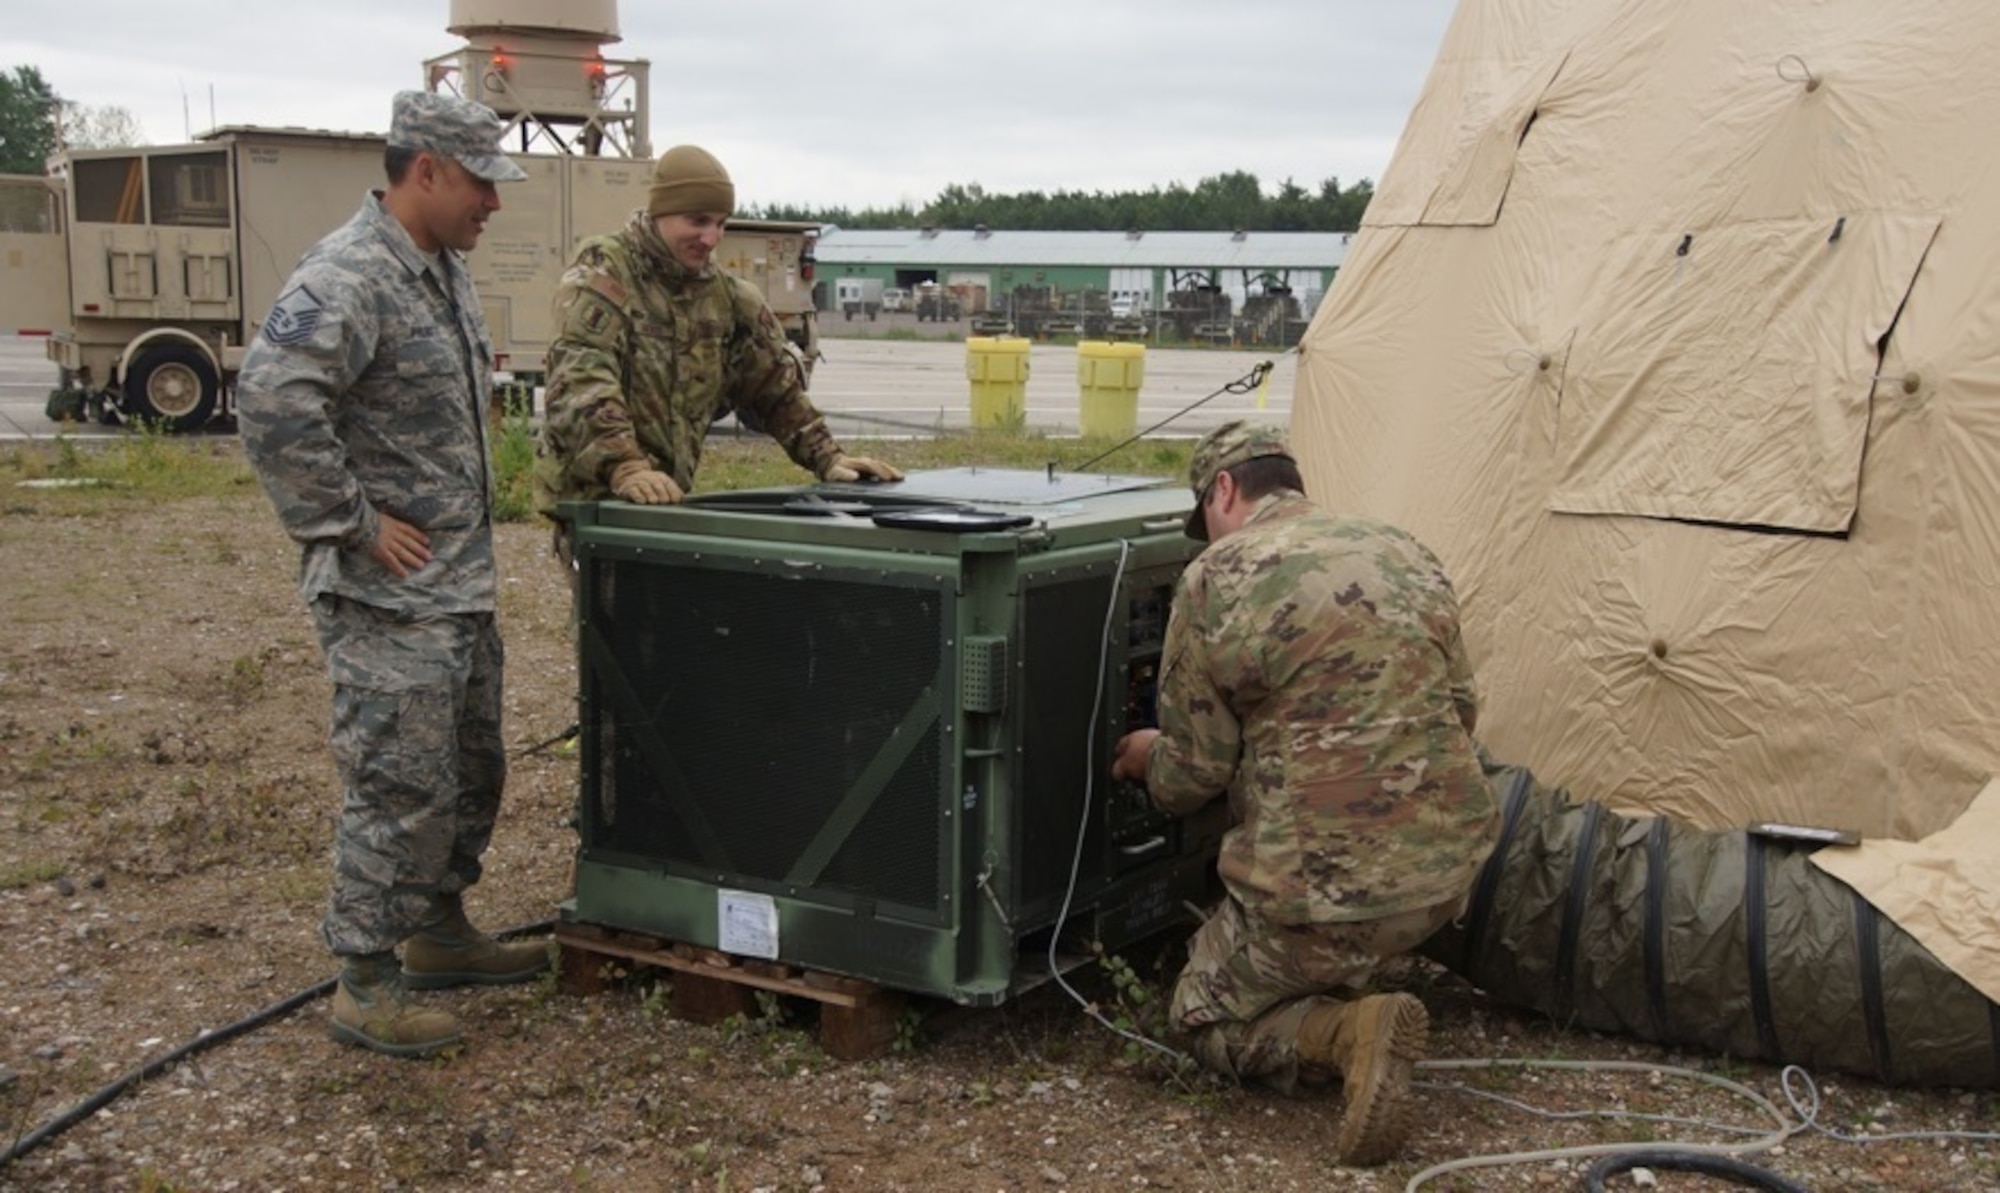 U.S. Air Force Master Sgt. Christopher Philibotte (left), Staff Sgt. James Medeiros (center) and Staff Sgt. Conner Bailey, 260th Air Traffic Controller Squadron, perform maintenance on a field deployable environmental control unit in Ramstein, Germany, June. 6th, 2019. The North Carolina Air National Guard, along with New Hampshire and Maine Air National Guard, flew to Ramstein Air Base, Germany to work with active duty 1st Combat Communications Squadron. The Air National Guard units assisted in training the active duty unit with set-up, use, and tear-down of a mobile tower and deployable tactical air navigation system. (Courtesy Photo by SrA Tsua Yang)